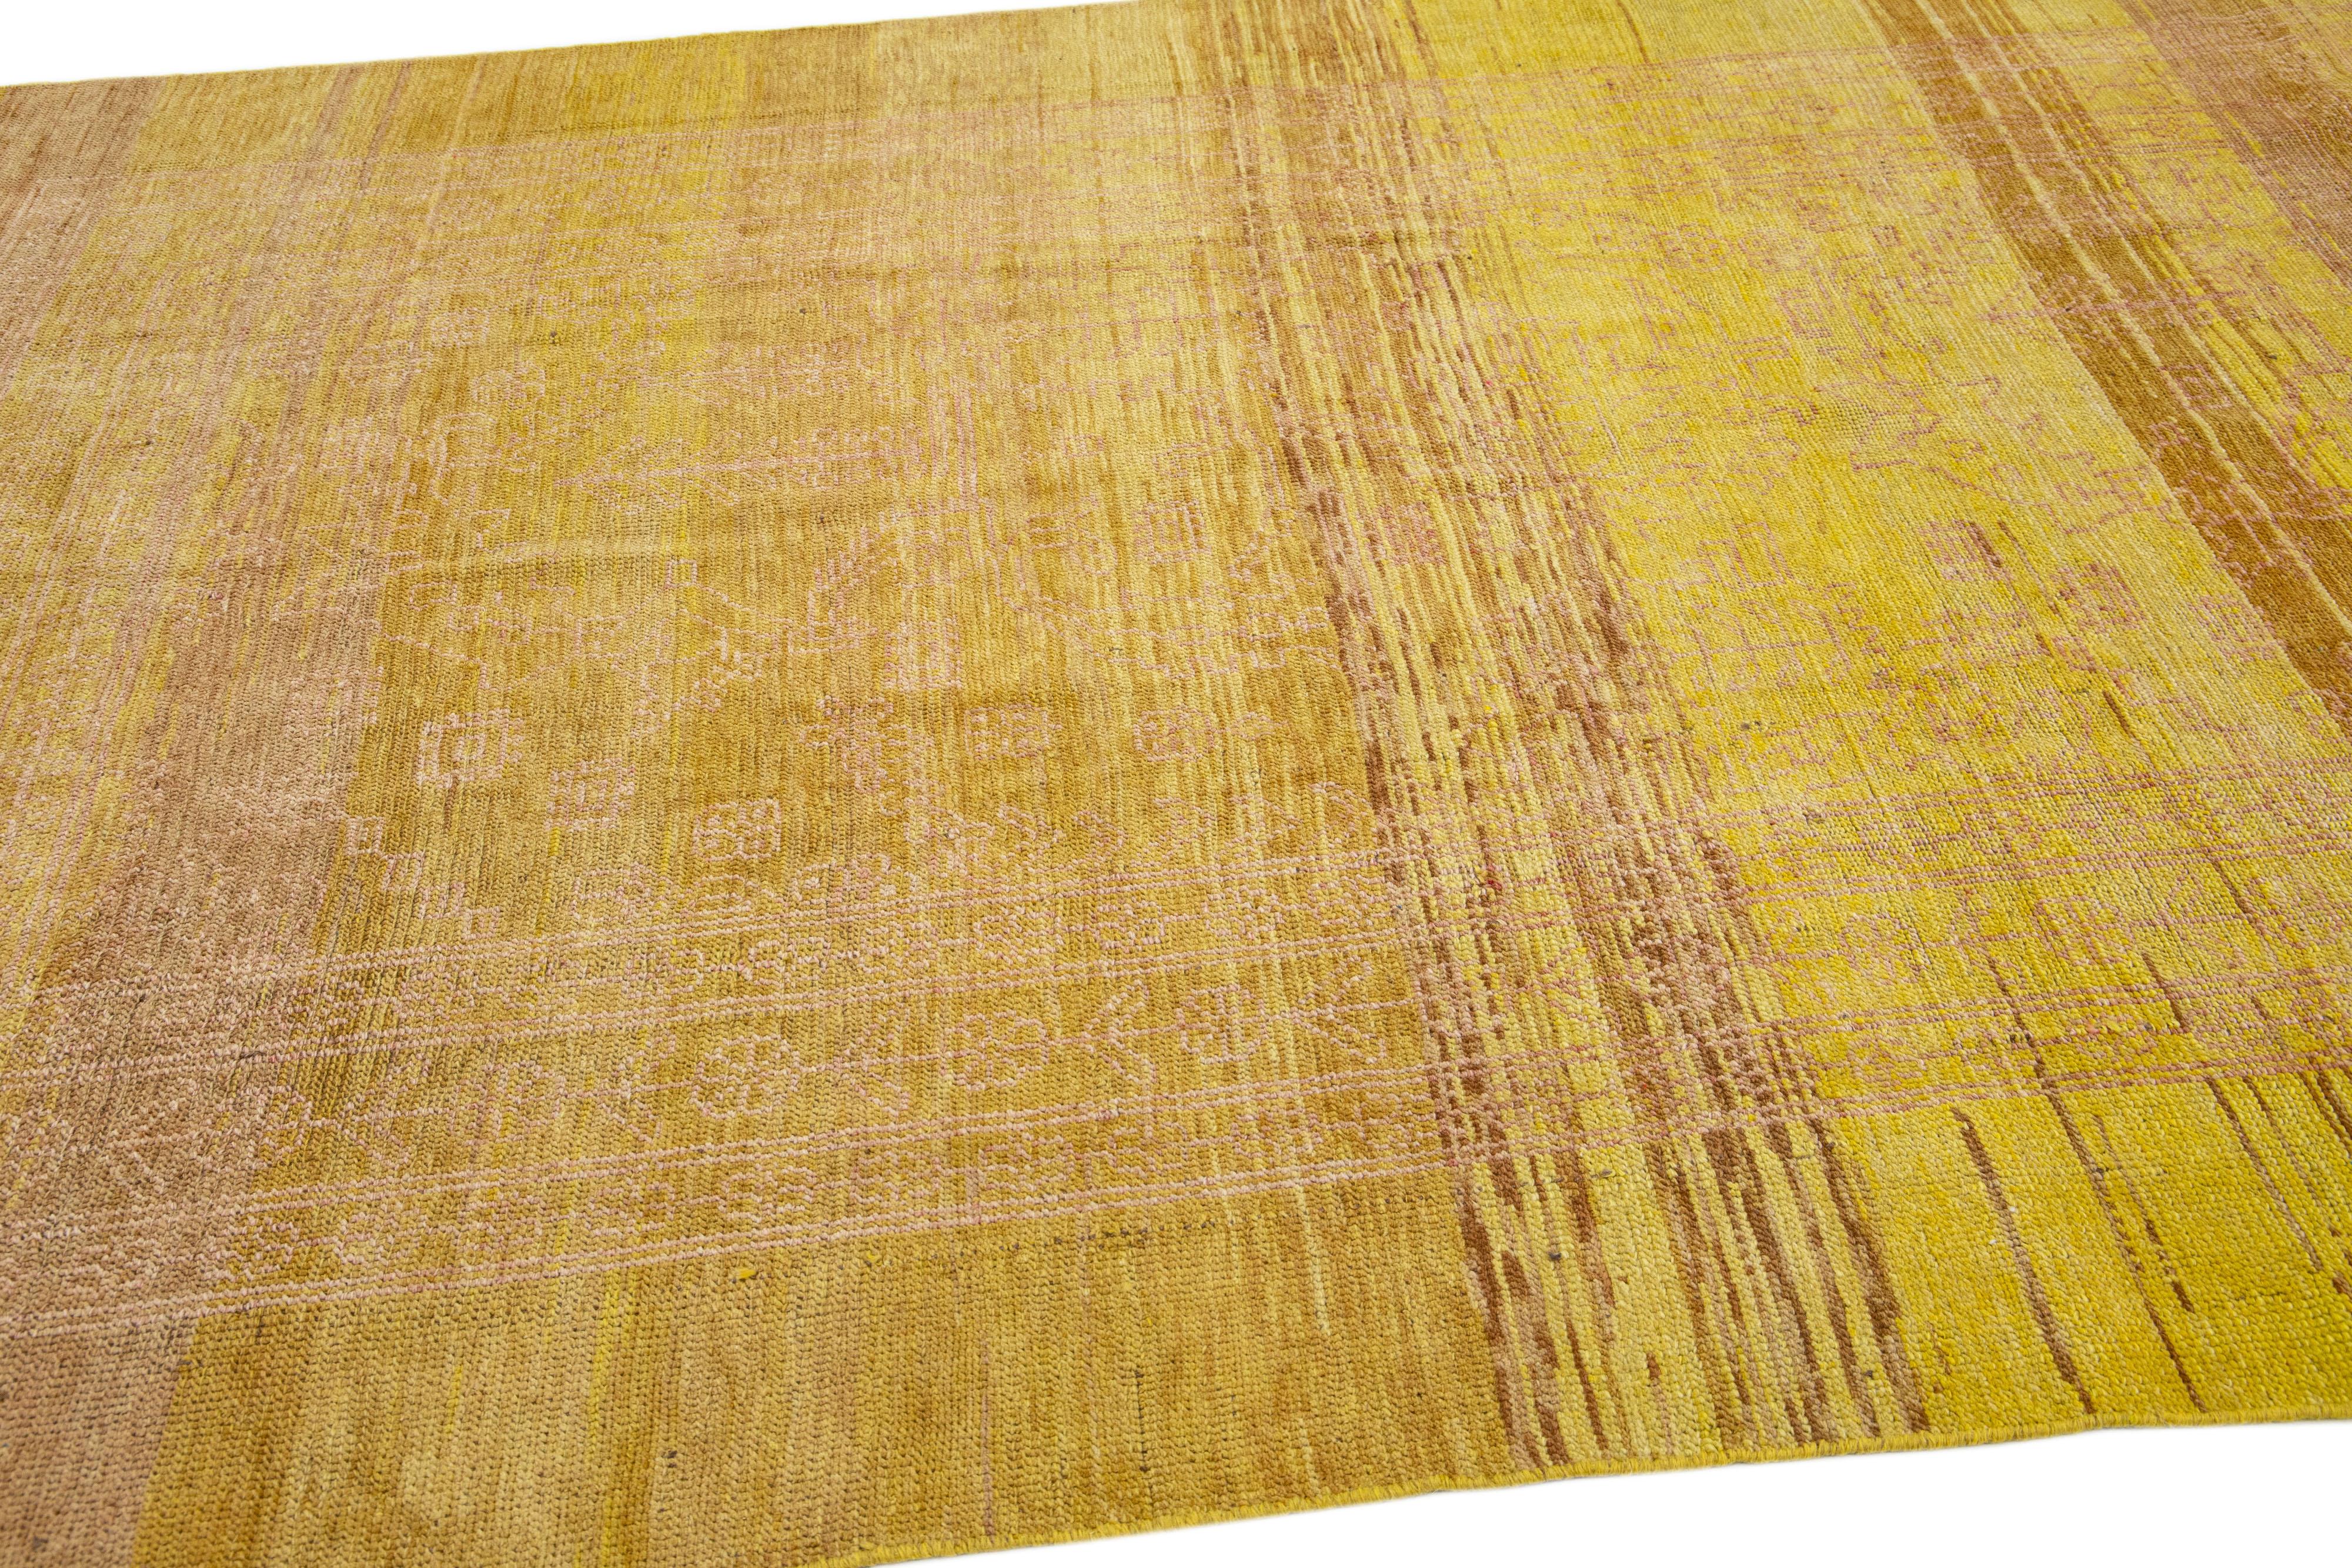 Modern Transitional Handmade Allover Yellow & Brown Wool Rug by Apadana In New Condition For Sale In Norwalk, CT